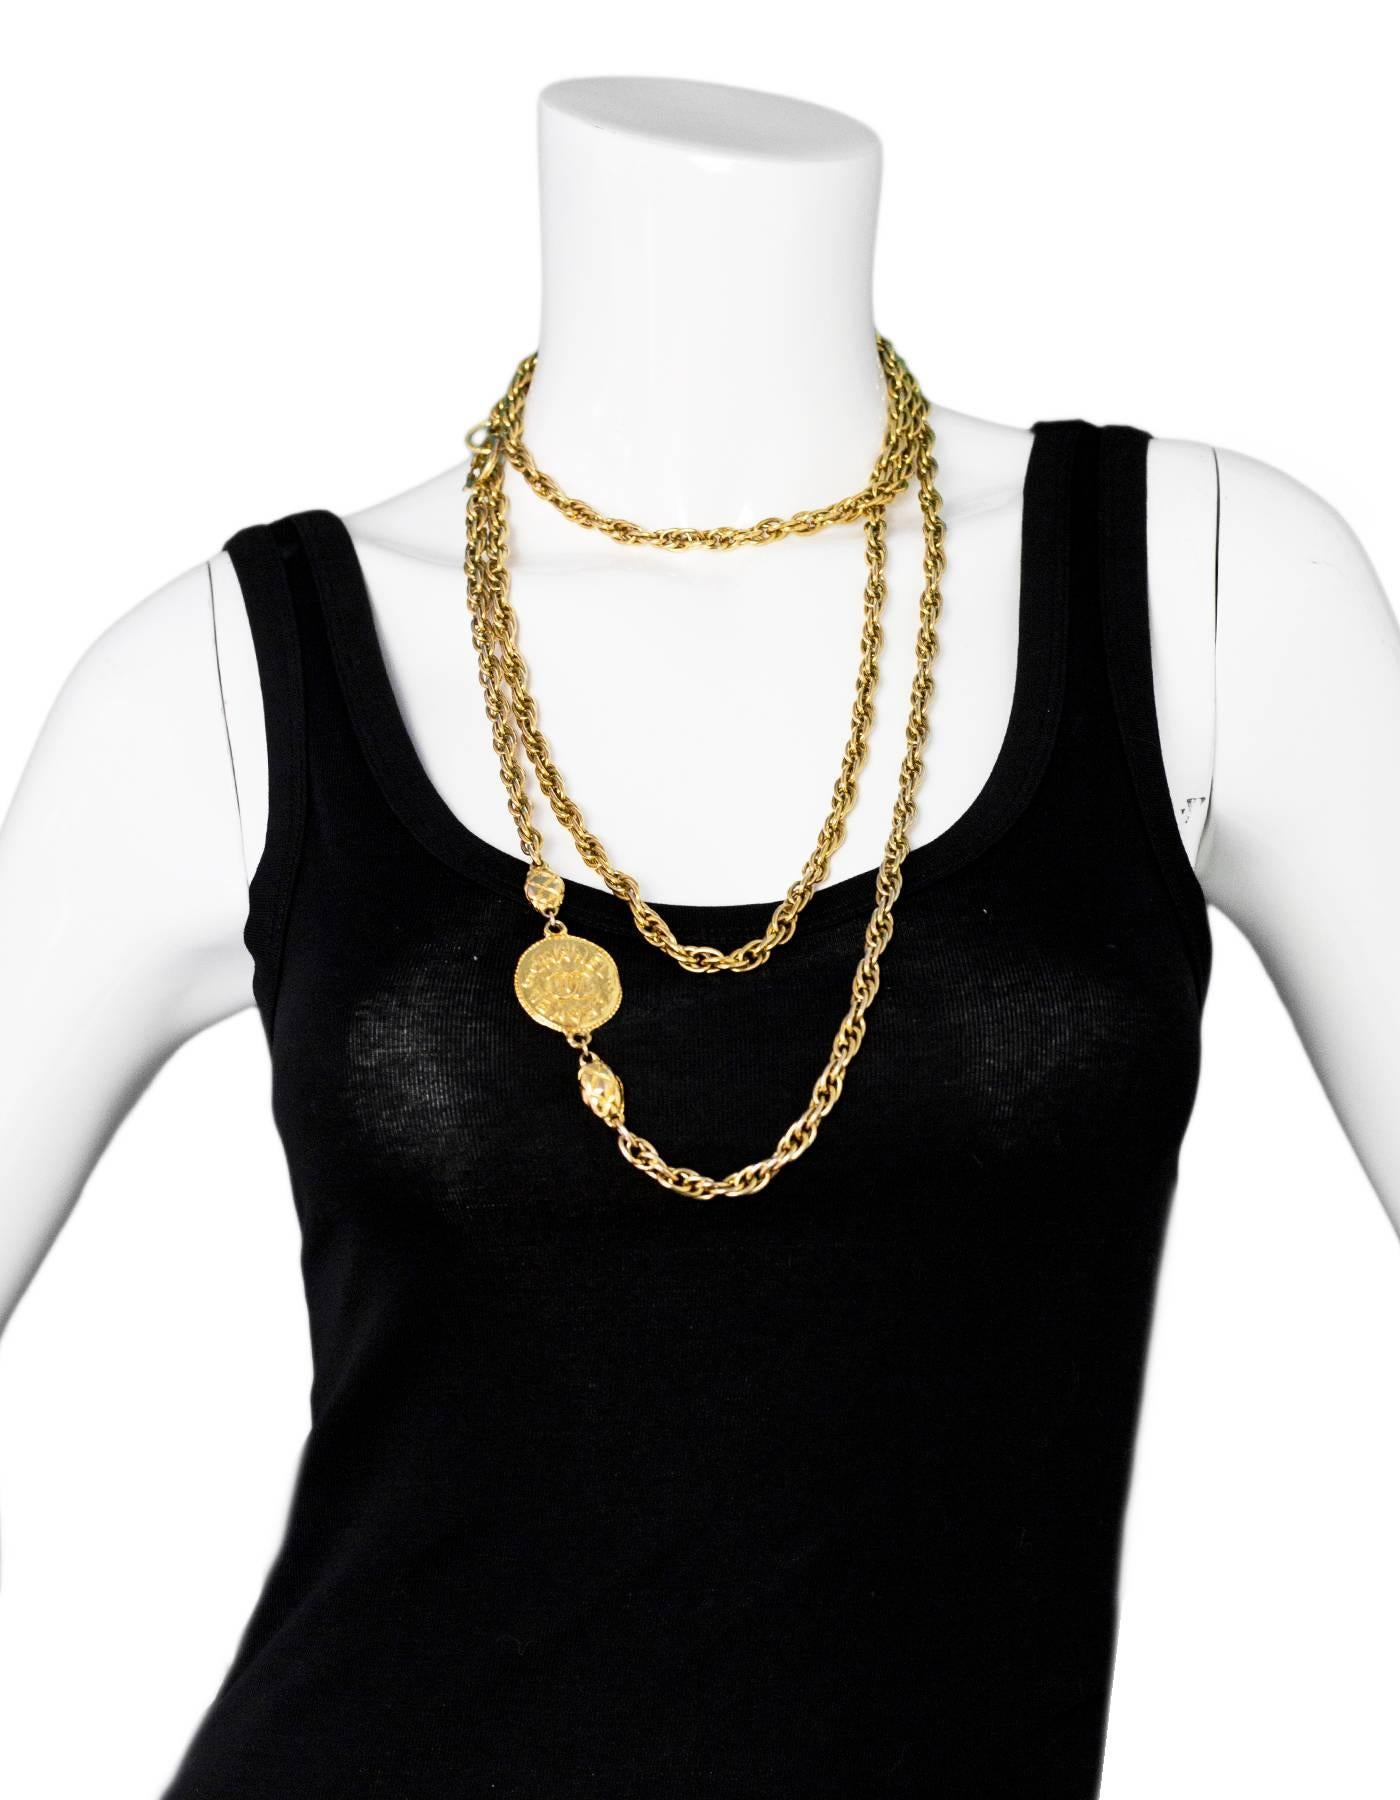 Chanel Vintage Goldtone Chainlink XL CC Necklace

Made In: France
Color: Goldtone
Materials: Metal
Closure: Jump ring closure
Stamp: Chanel CC Made in France
Overall Condition: Excellent vintage, pre-owned condition with the exception of light